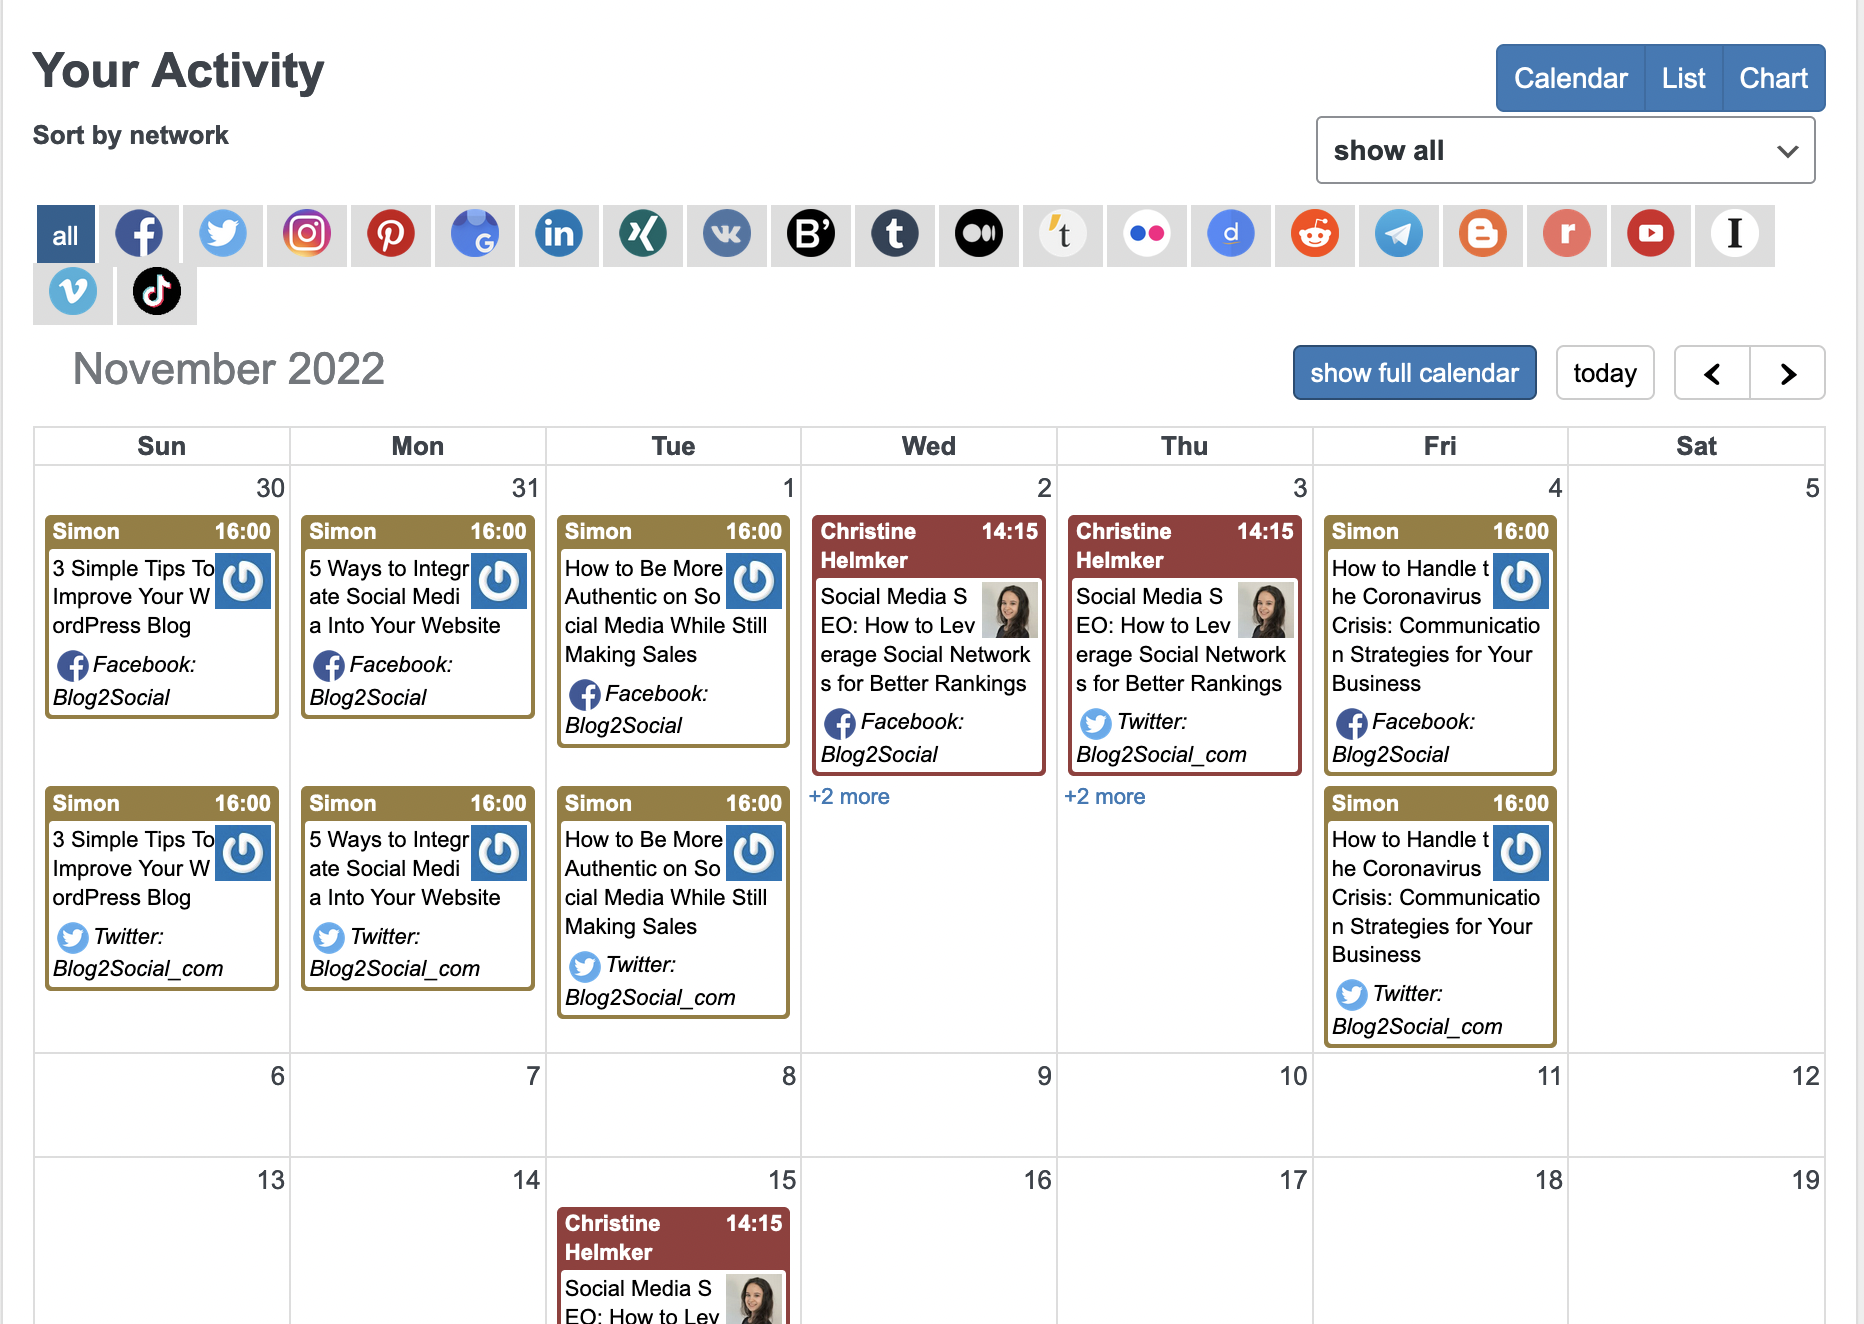 The shared social media calendar with all your social media posts.